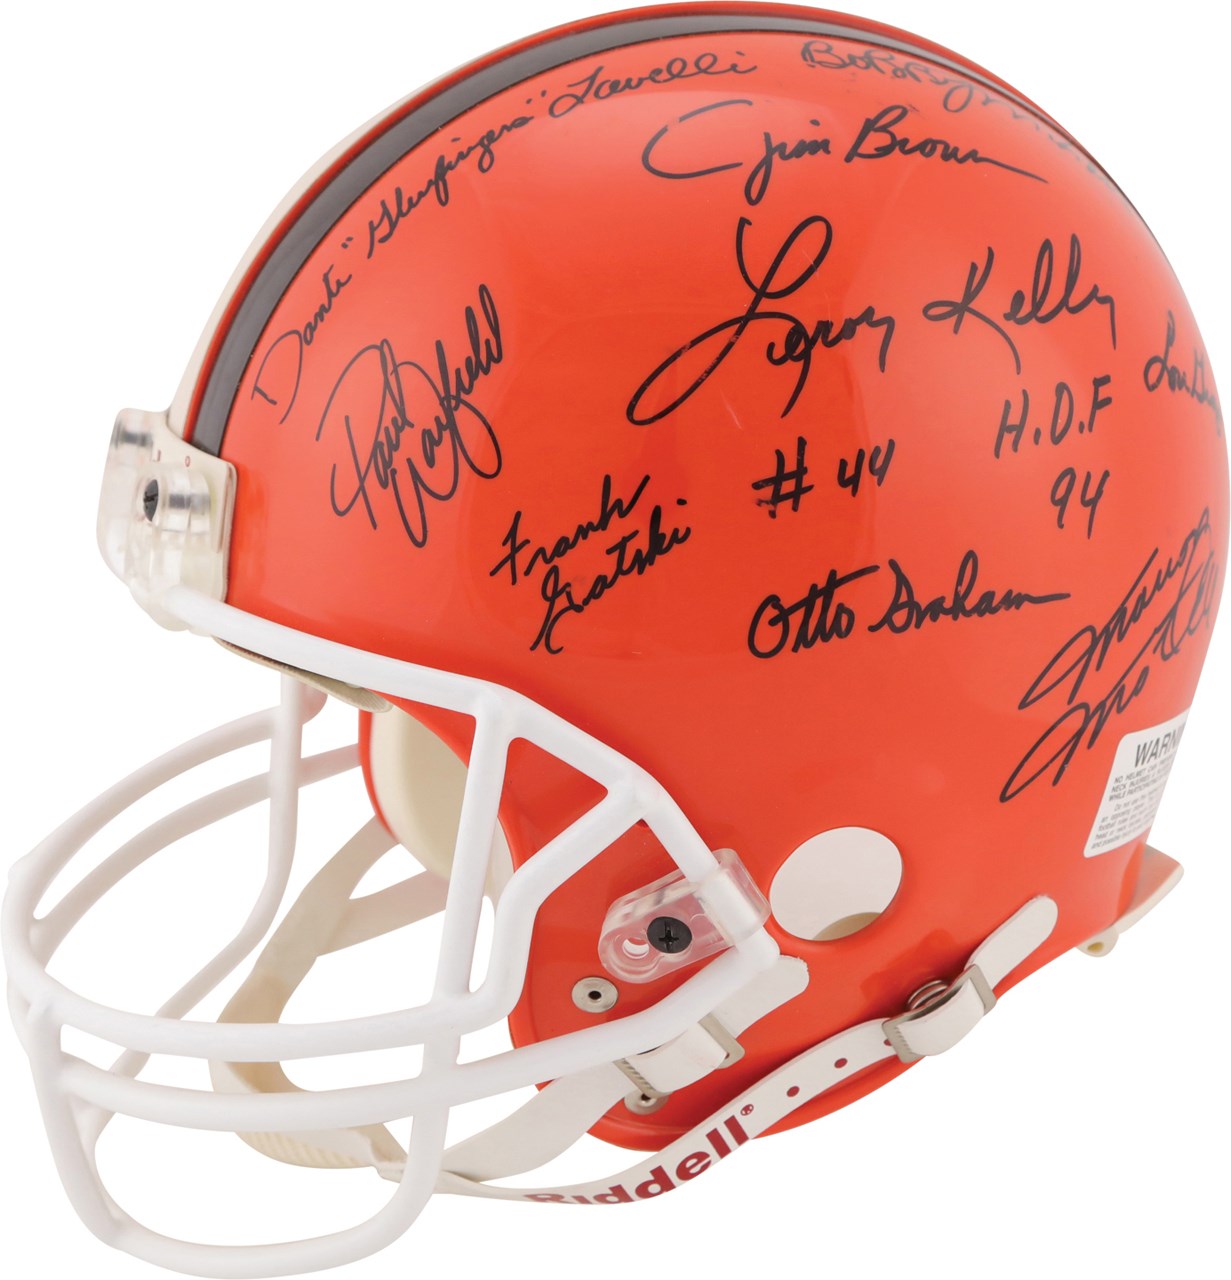 Cleveland Browns All Time Greats Signed Full Size Helmet w/Graham and Brown